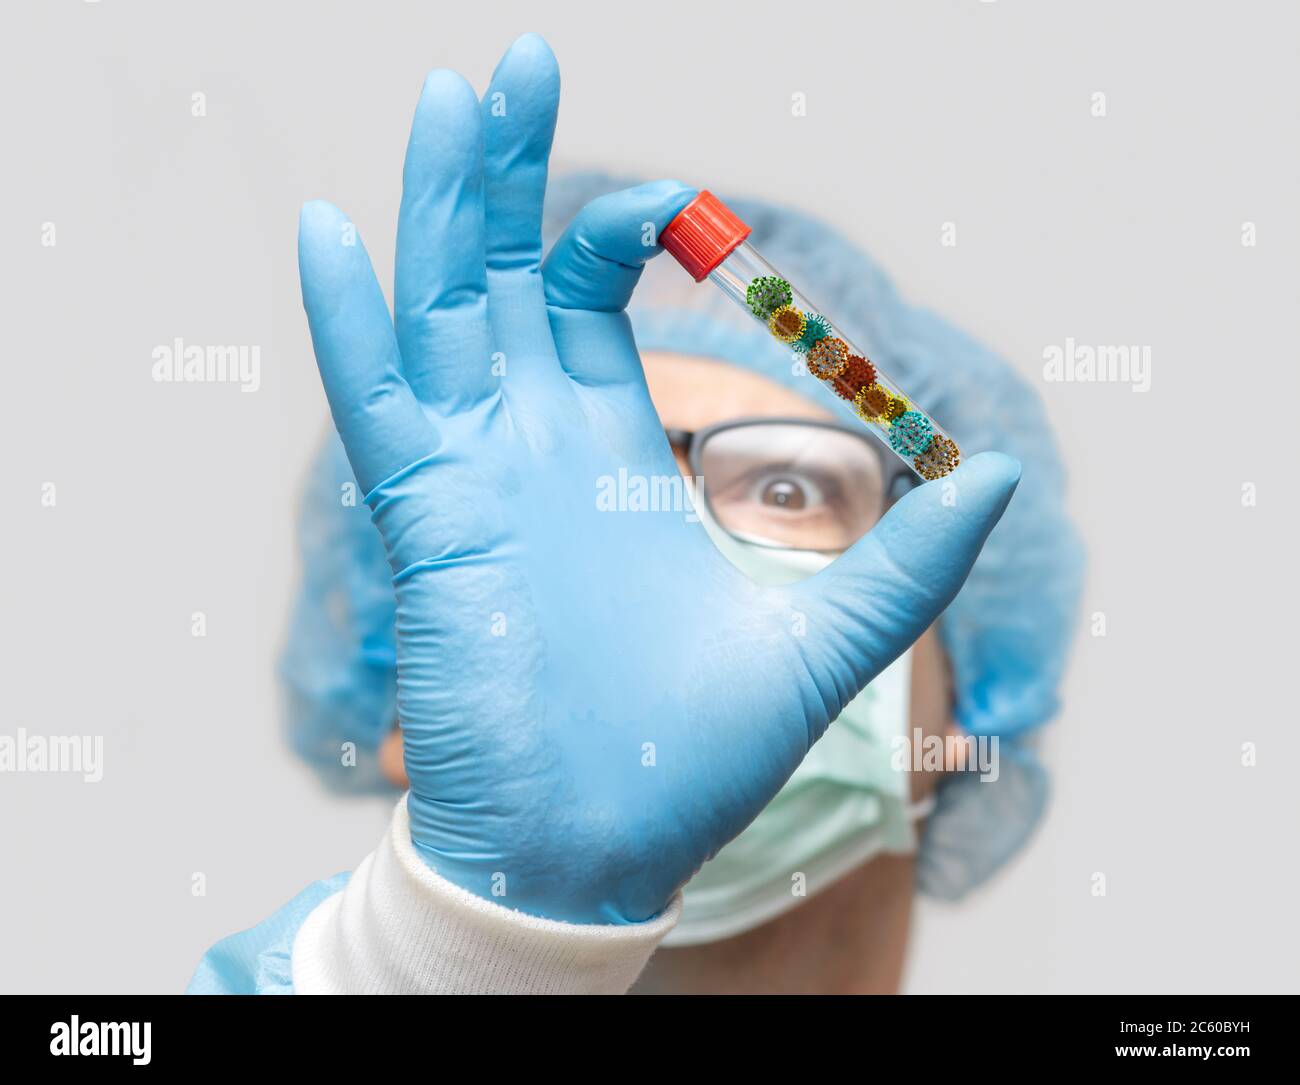 The doctor hold test tube with a collect of virus inside, focus on a hand, blurred face. Research of a dangerous microorganism. Stock Photo